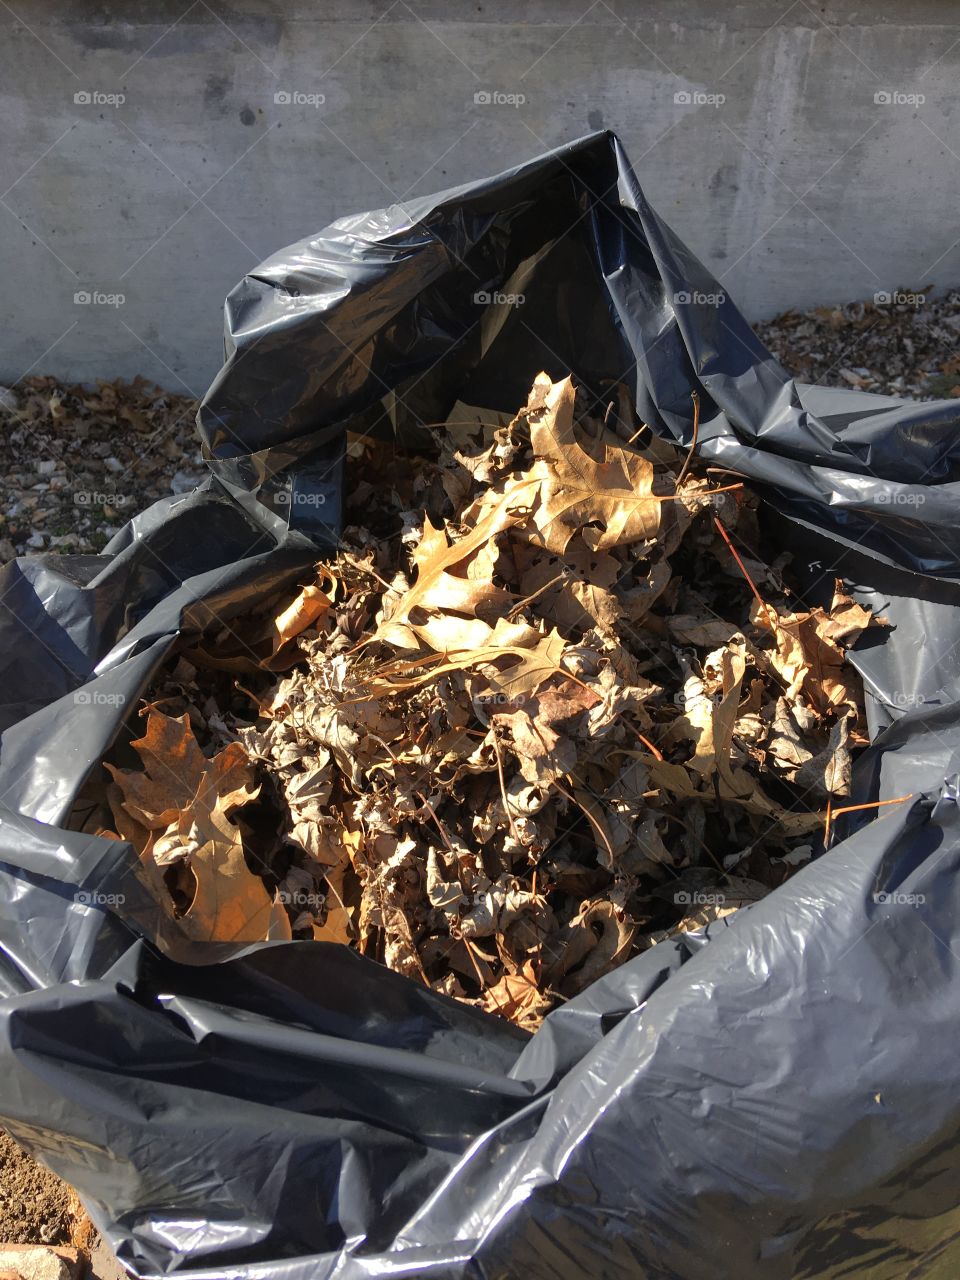 A Big black bag of dried brown leaves that has been raked up to throw in the dumpster. 